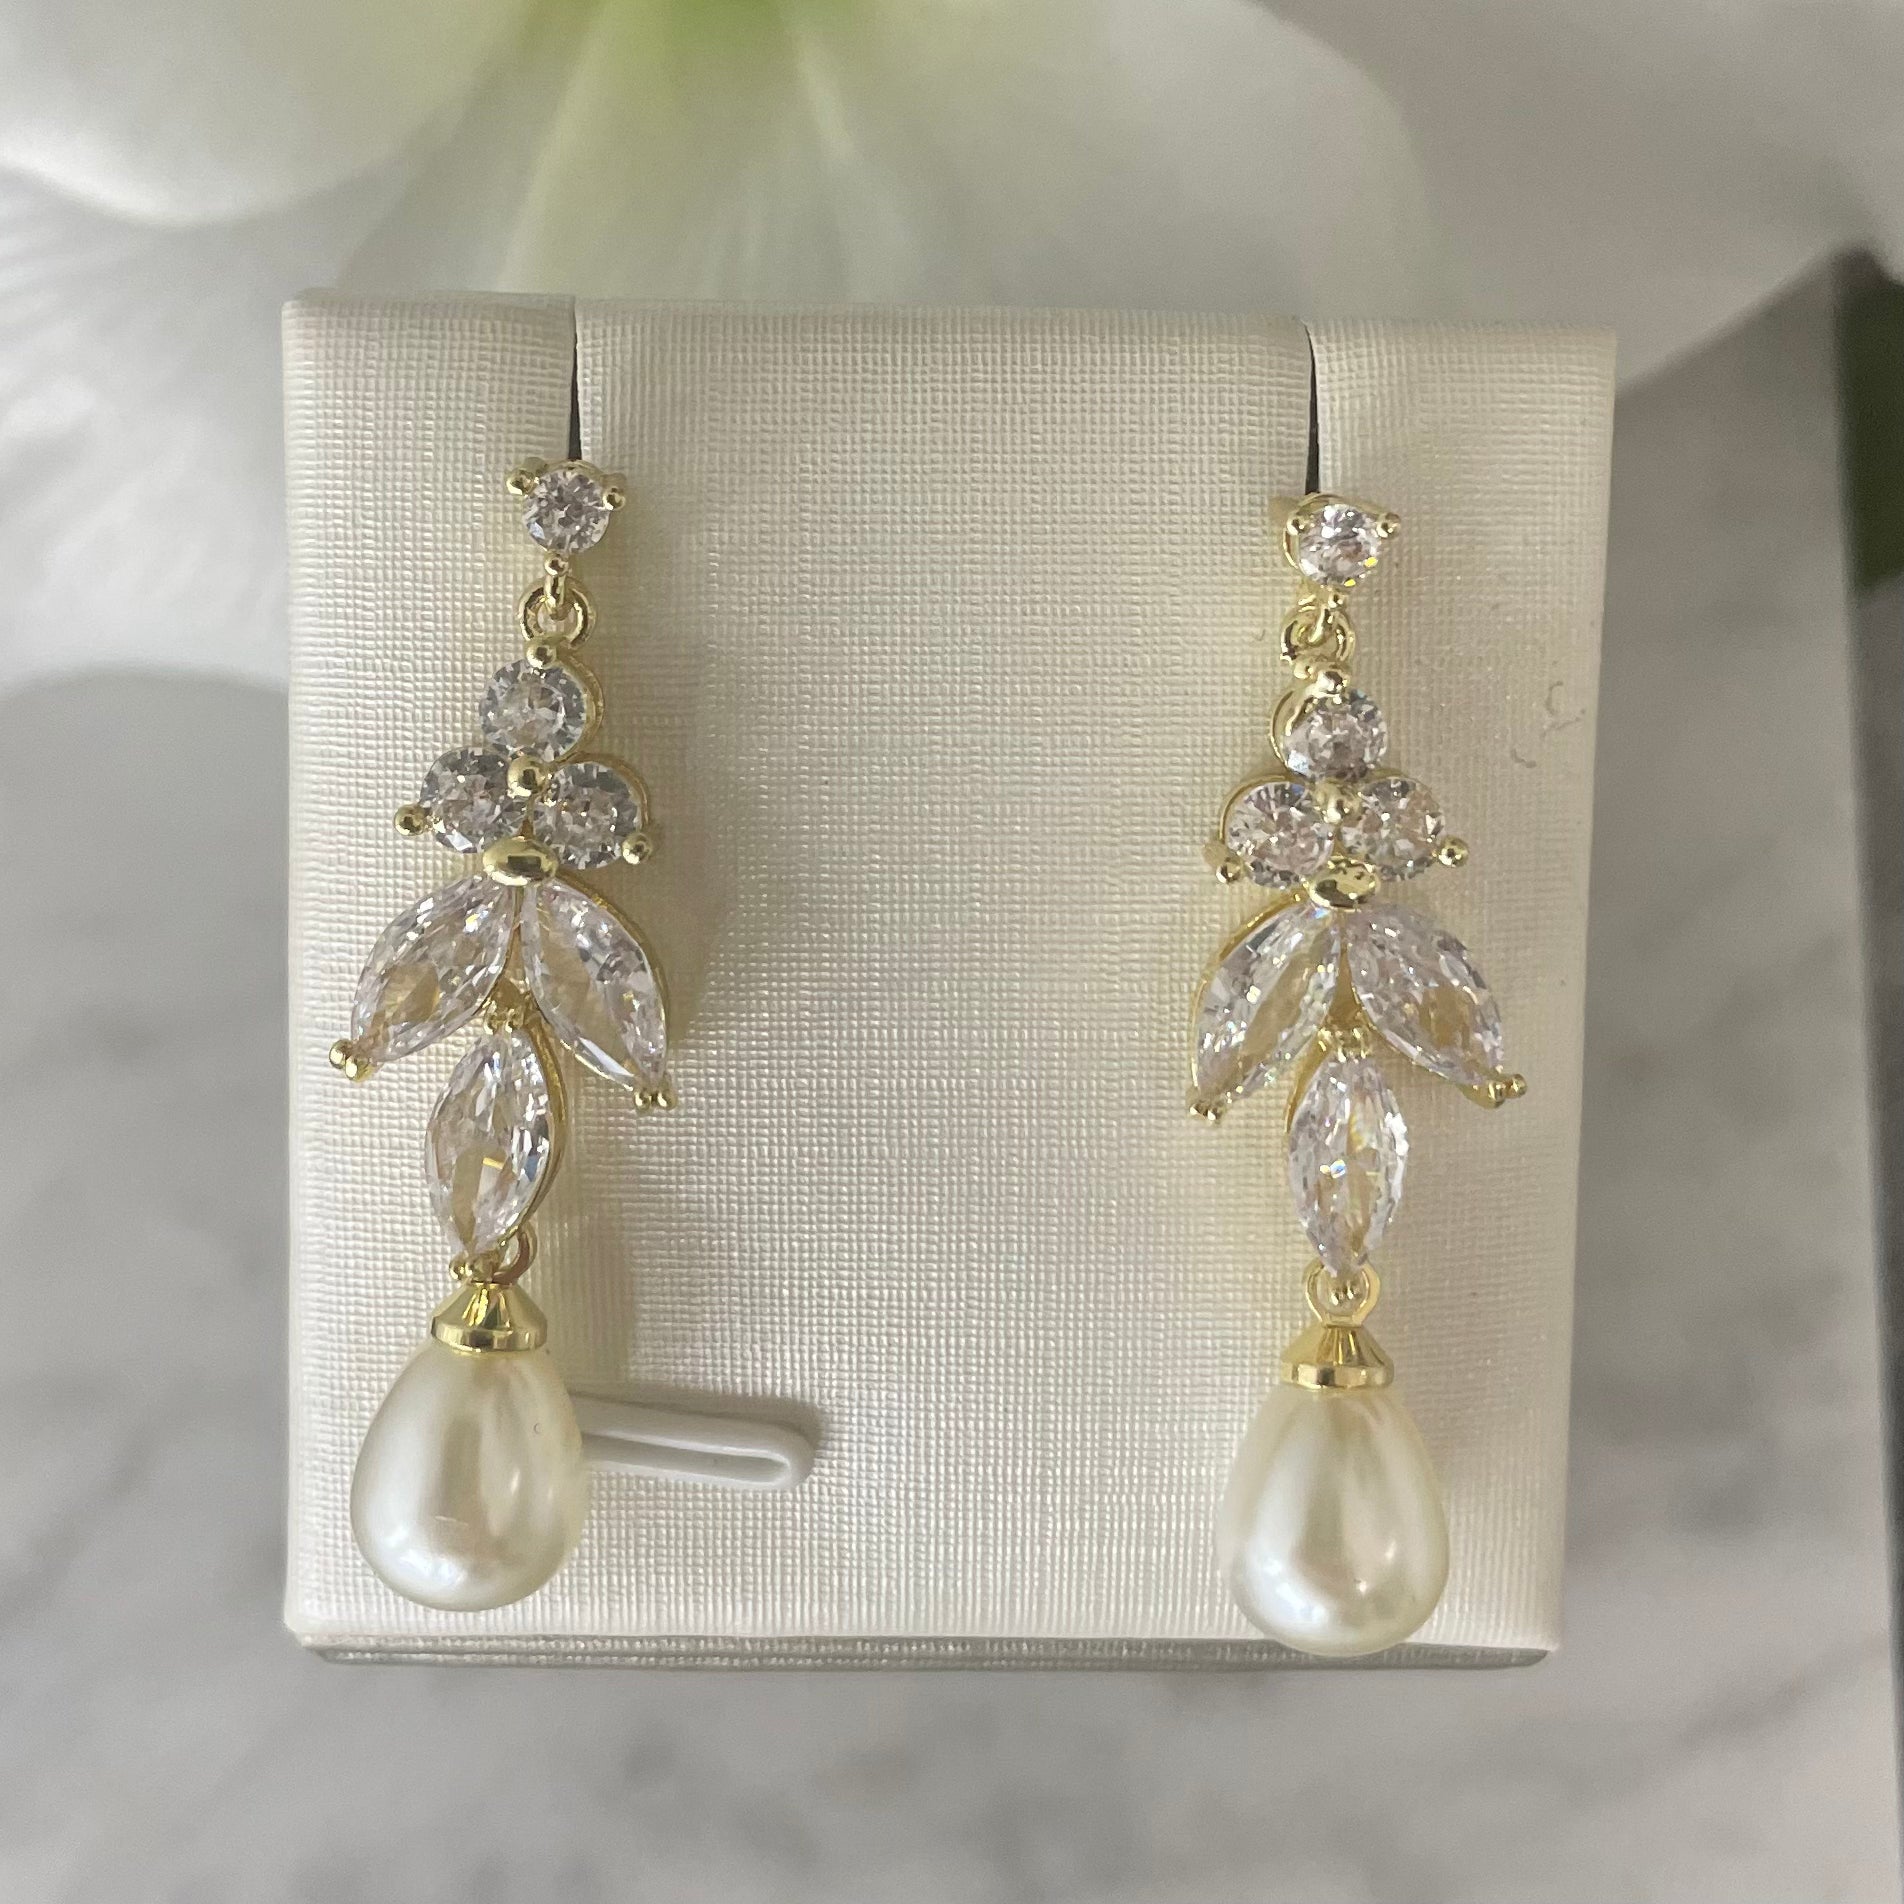 Coco Bridal Earrings with Gold Plated Leaf CZ and Pearl Drops - Divine Bridal